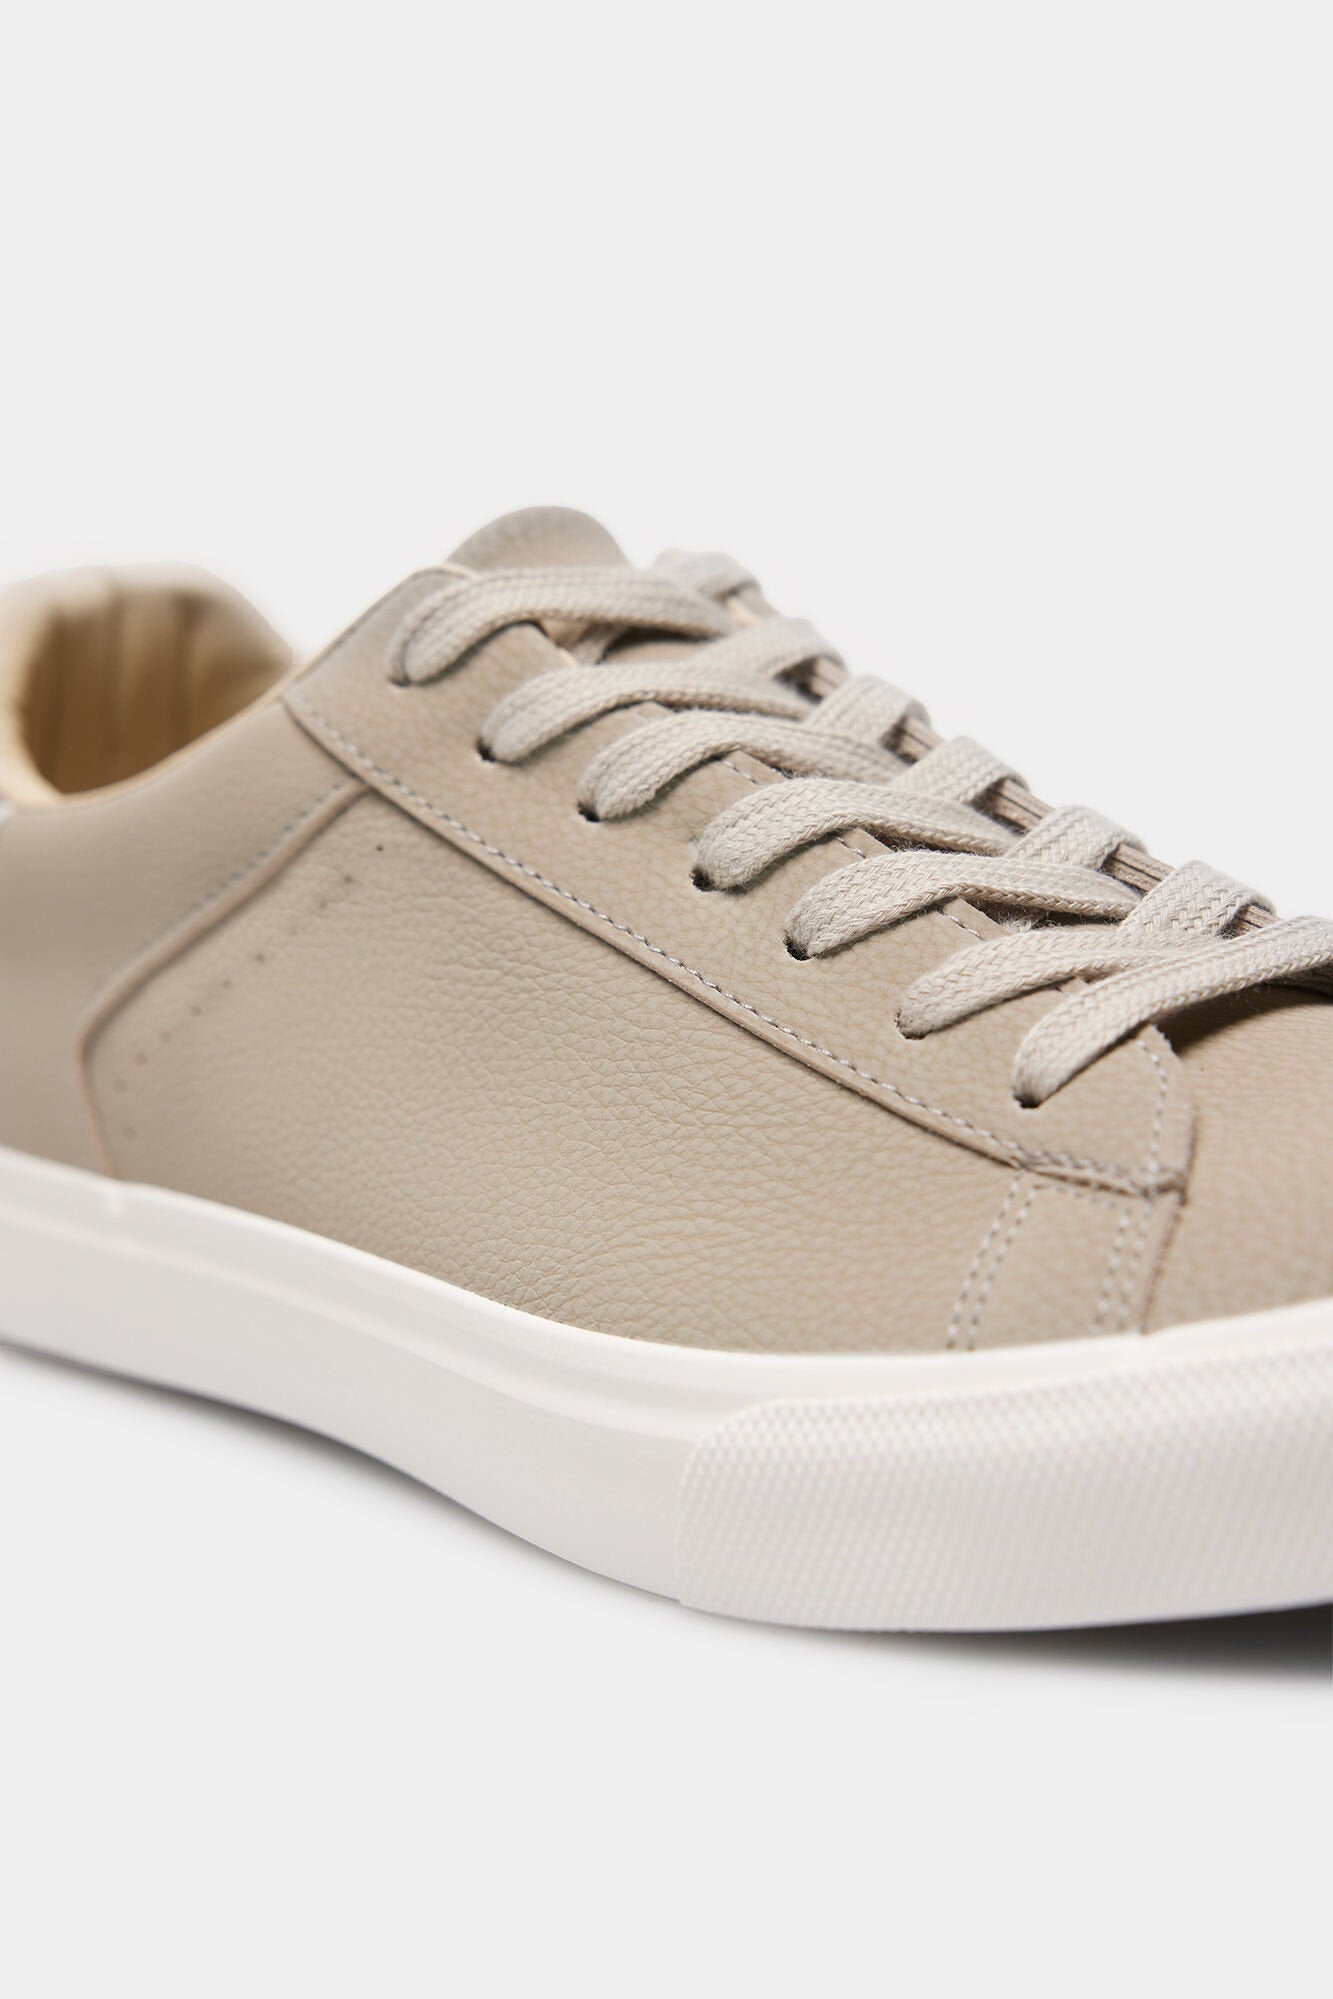 Beige Lace Up Trainers With White Sole_2997584_41_08